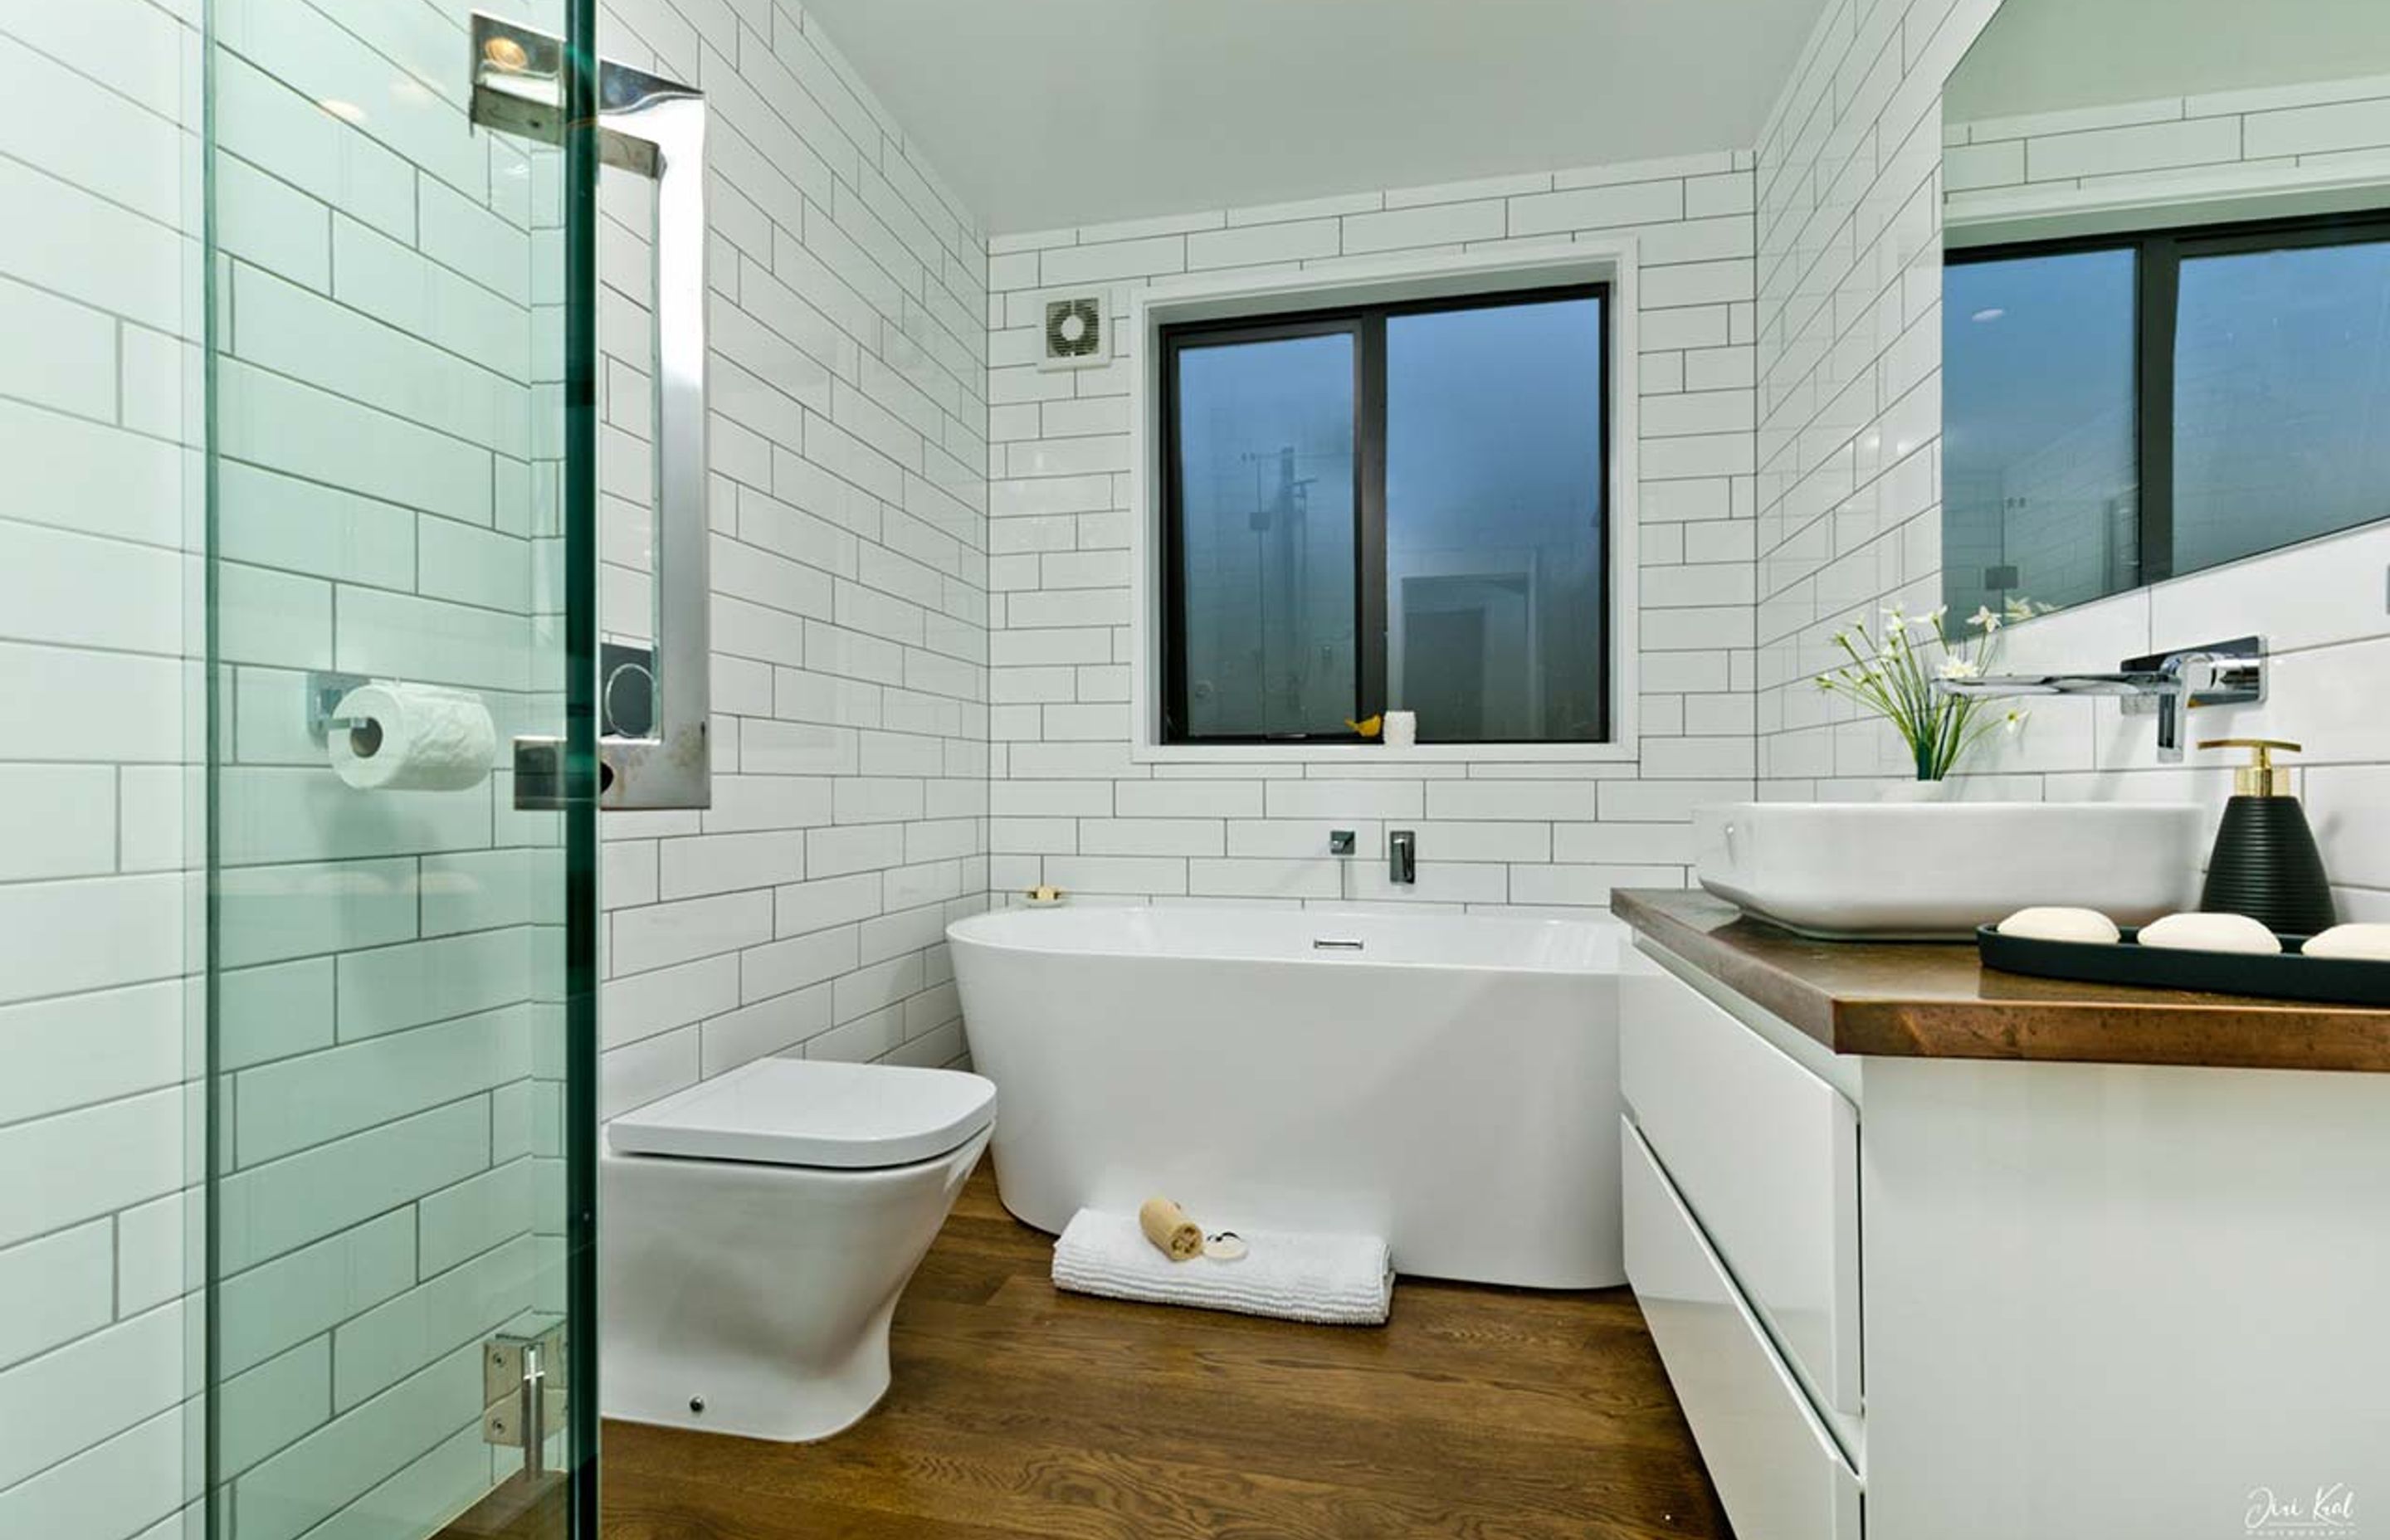 Increase The Value Of Your Home With Bathroom And Kitchen Renovations